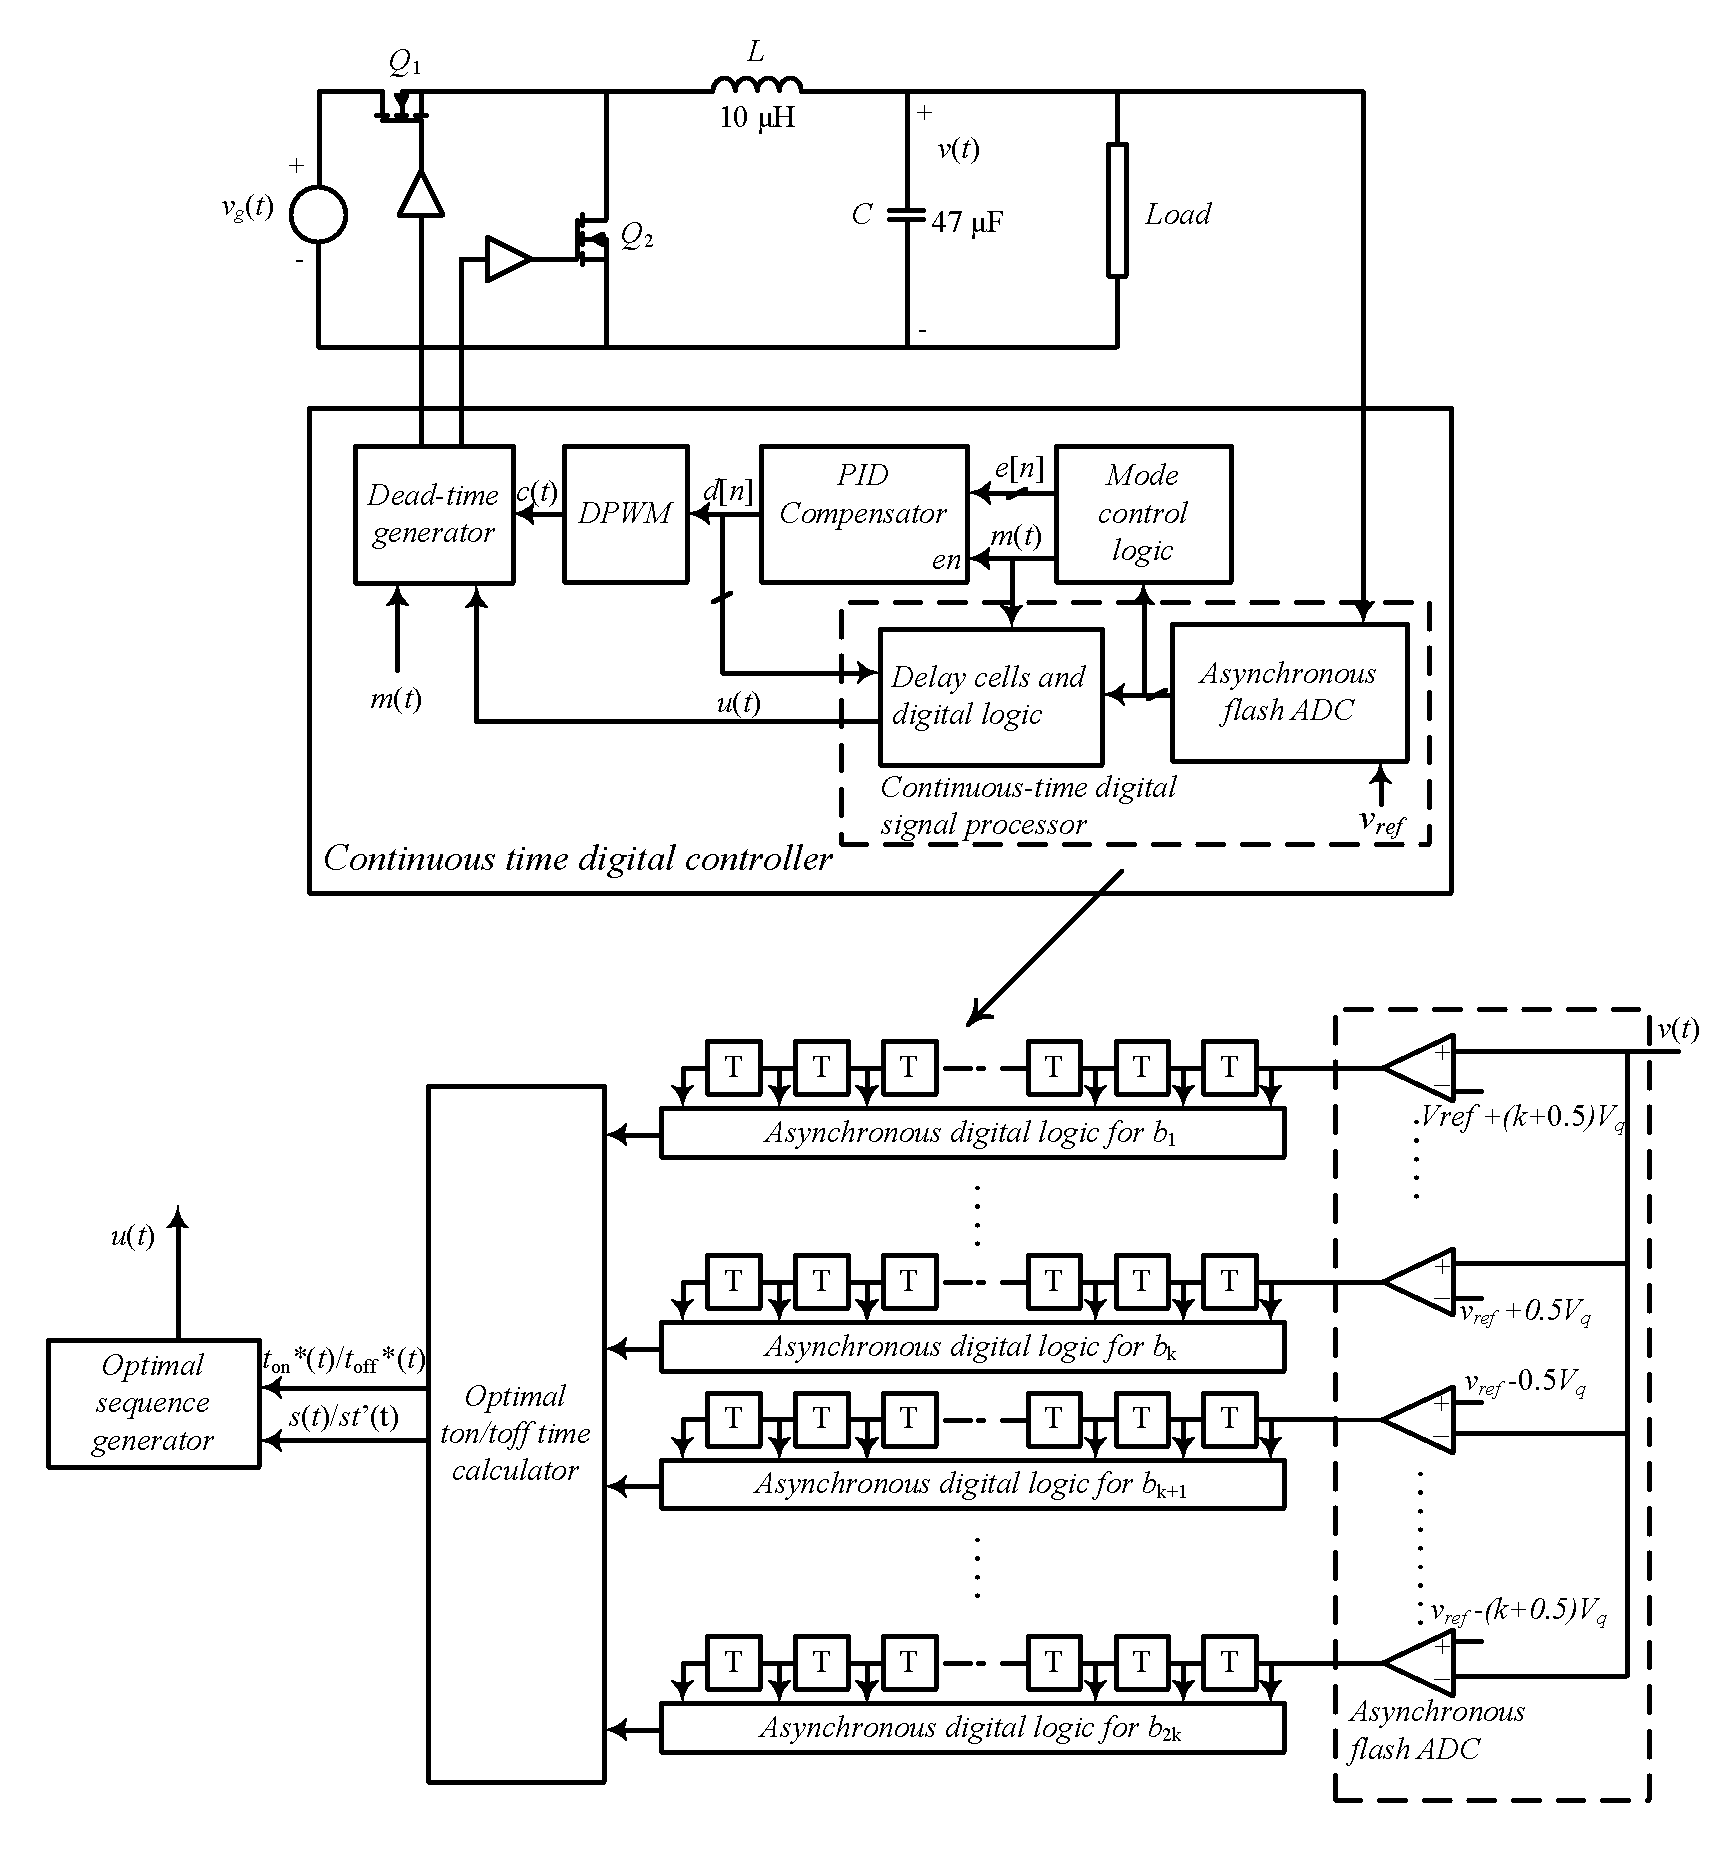 Continuous-time digital controller for high-frequency dc-dc converters